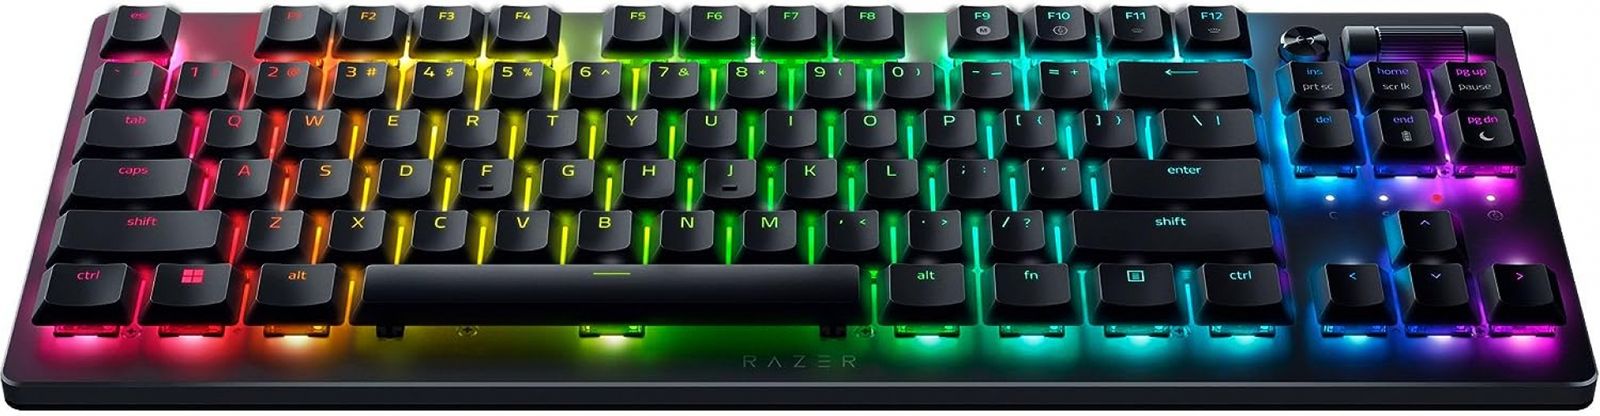 Razer DeathStalker V2 Pro TKL Gaming Keyboard Dual Wireless Optical Red Switches RGB US-Layout ISO